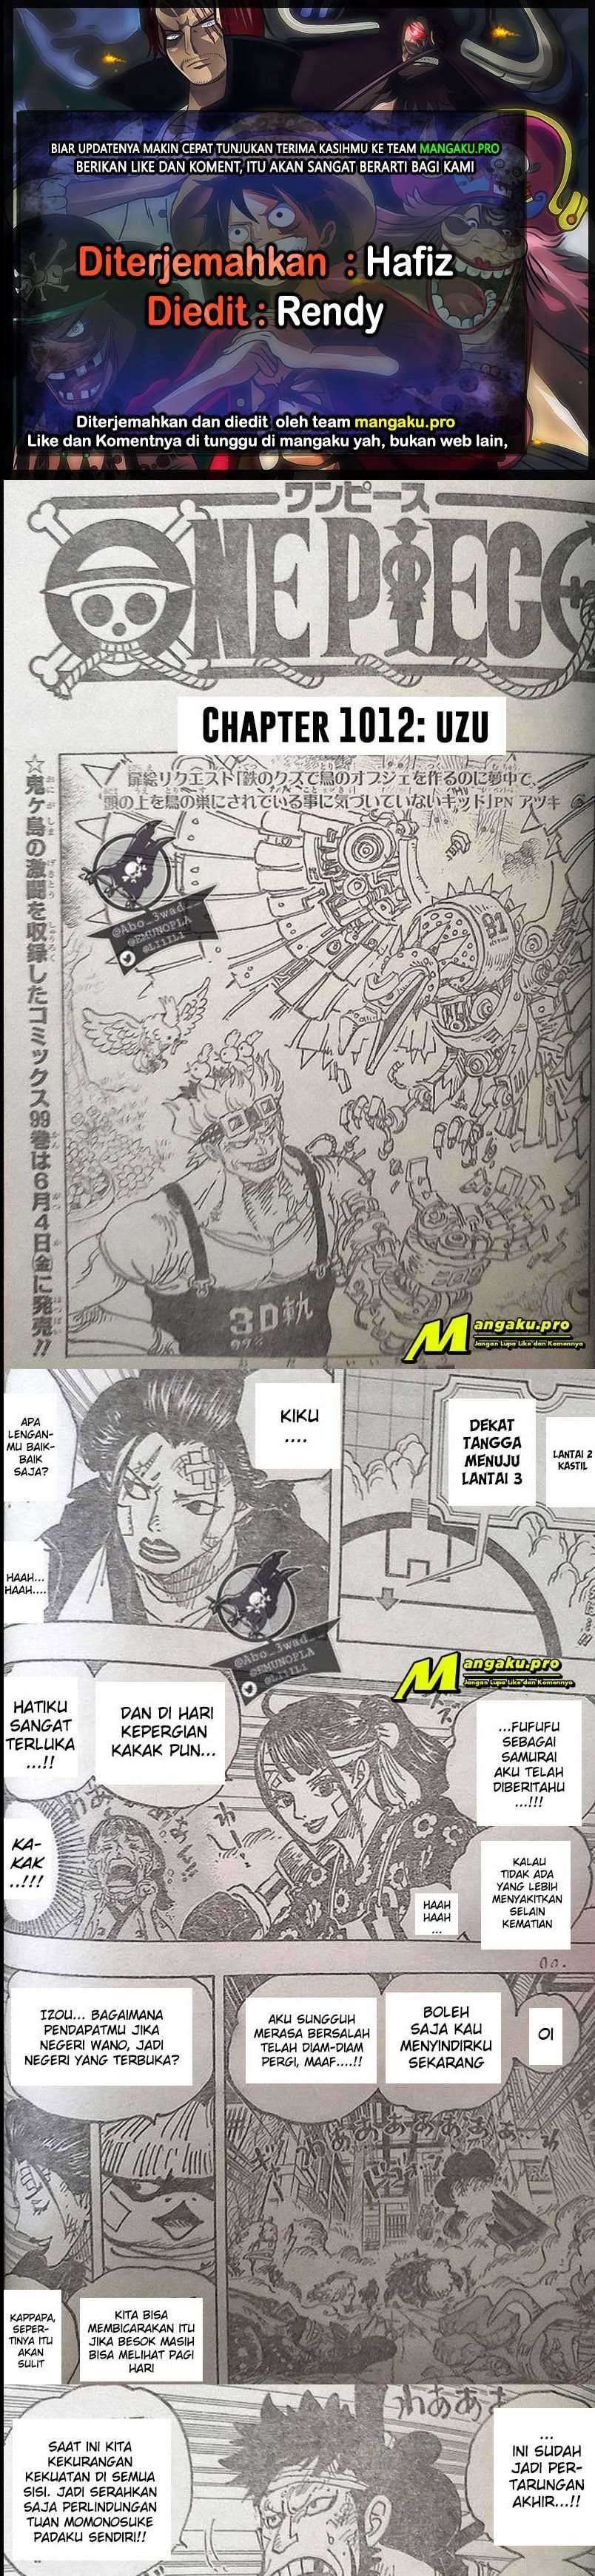 One Piece Chapter 1012 lq Image 0